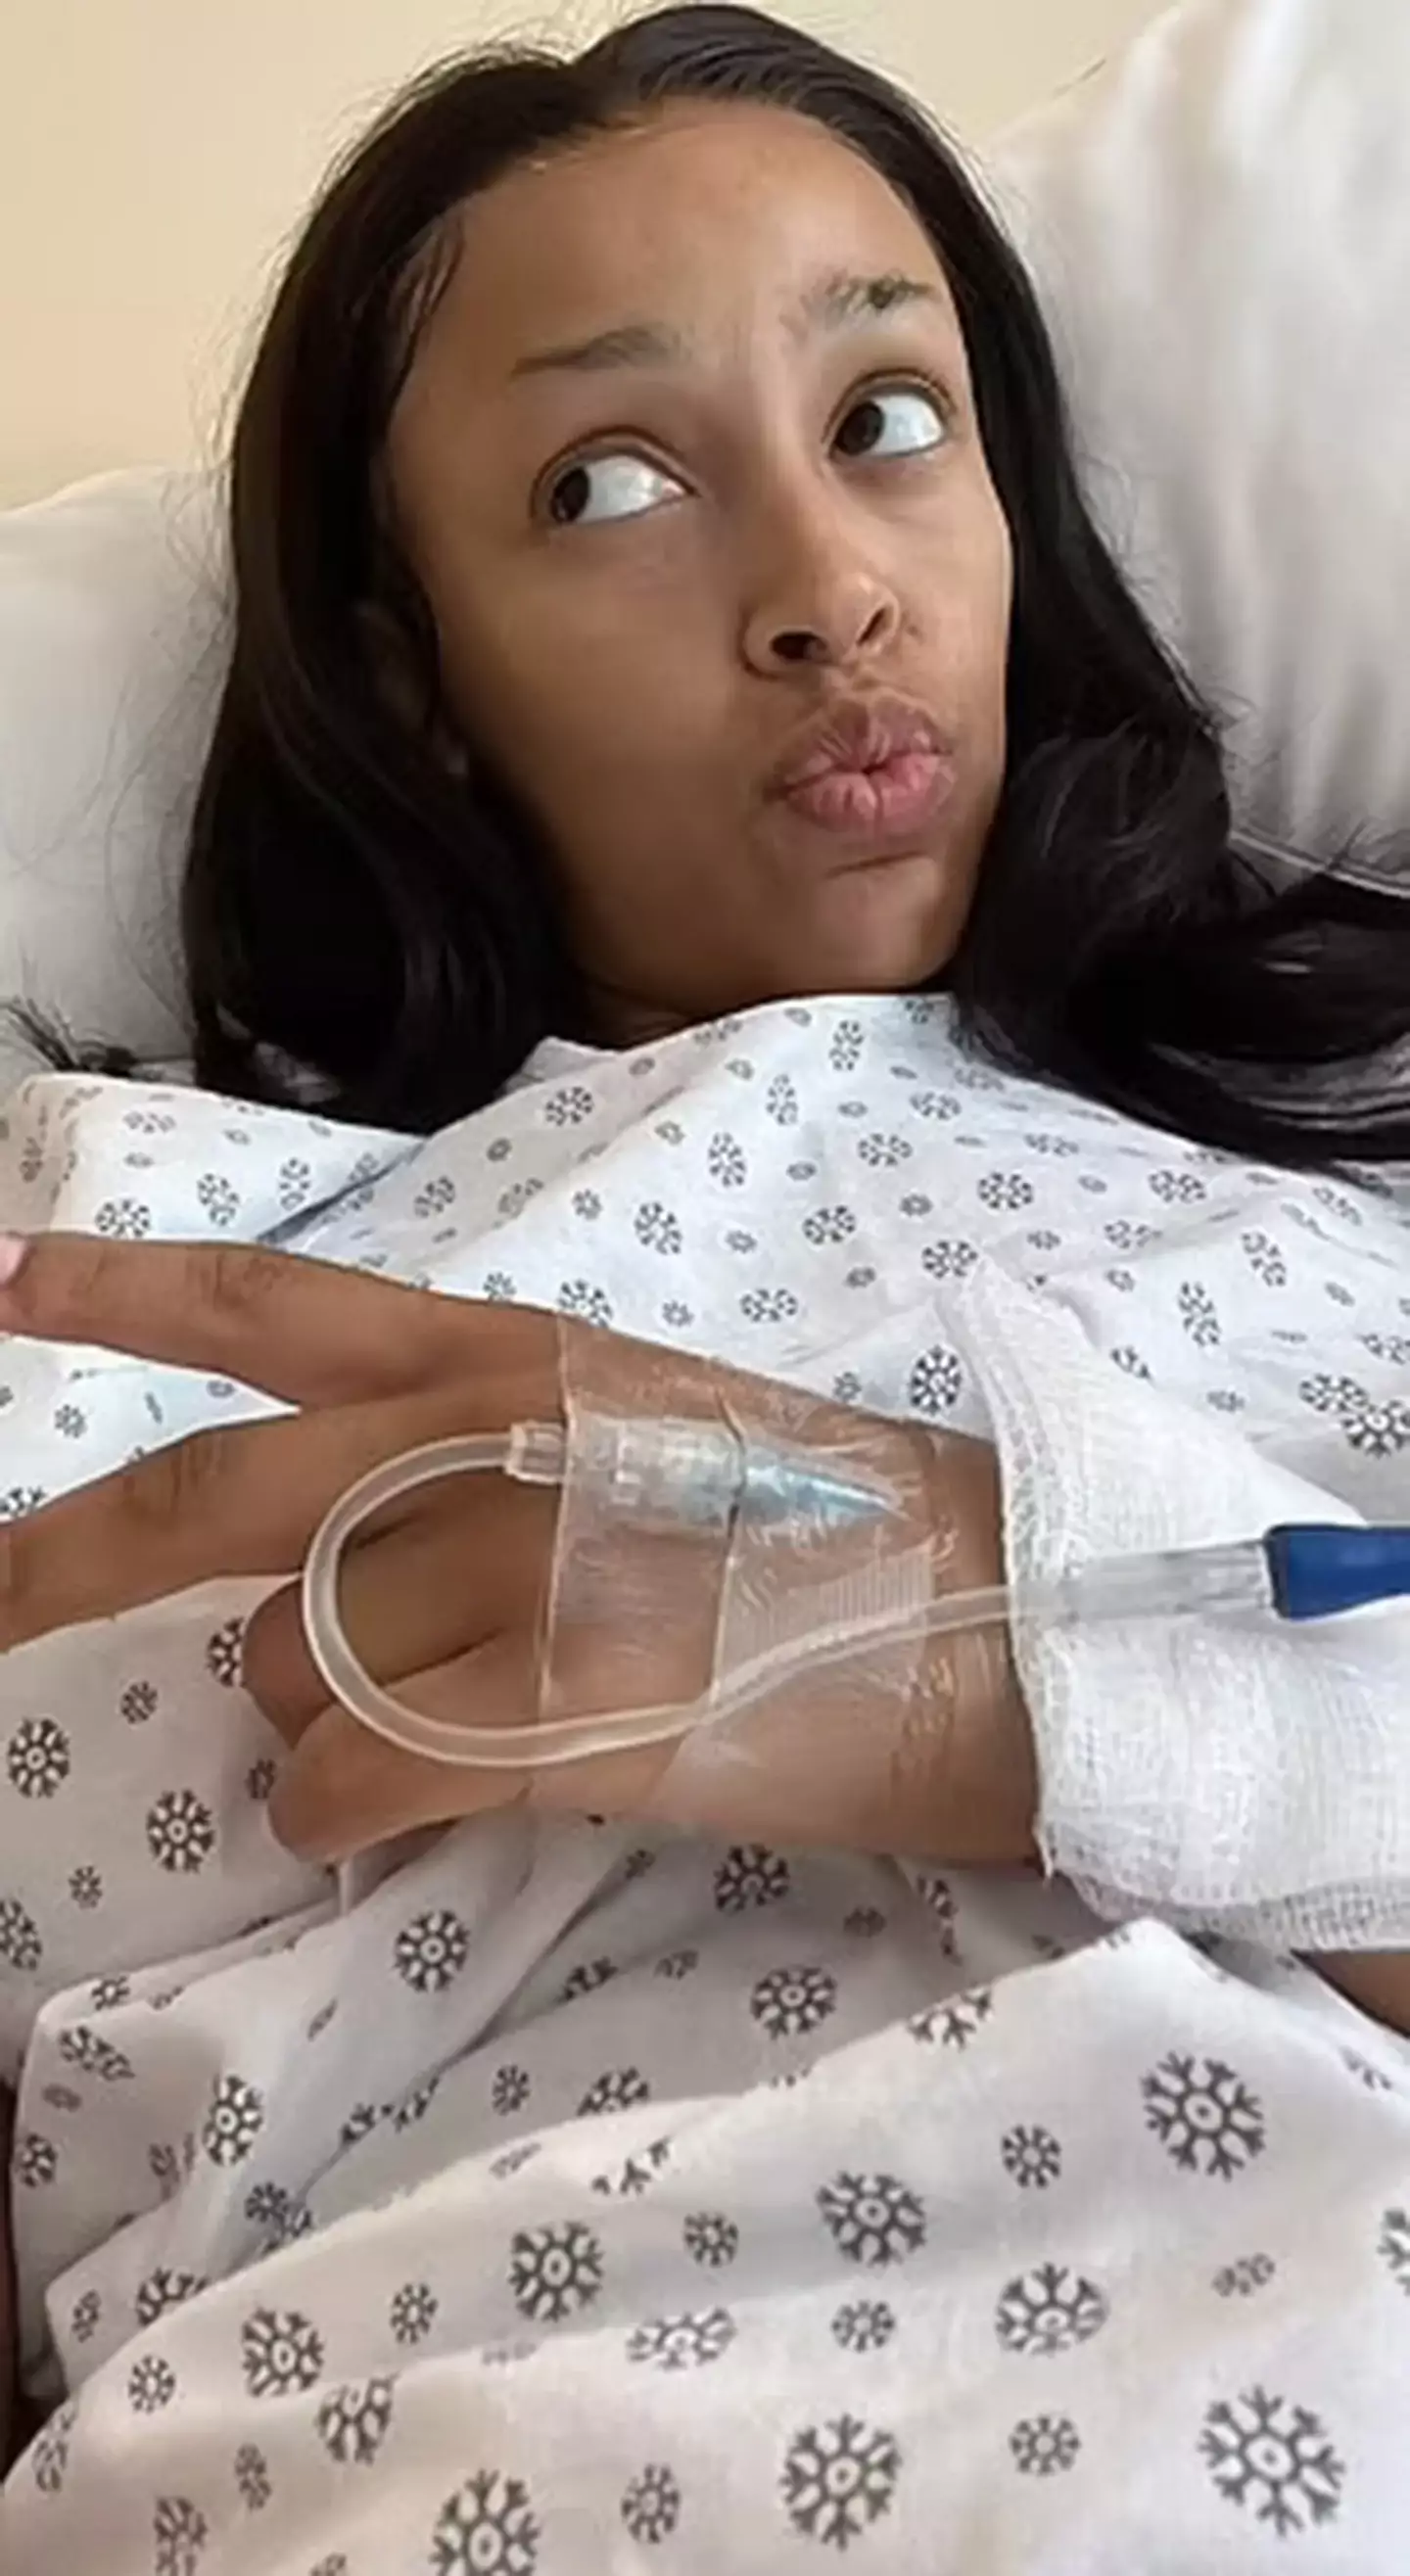 The 'Say So' singer, now aged 27, was in hospital last year after undergoing her second throat surgery to remove an abscess that was causing severe pain.